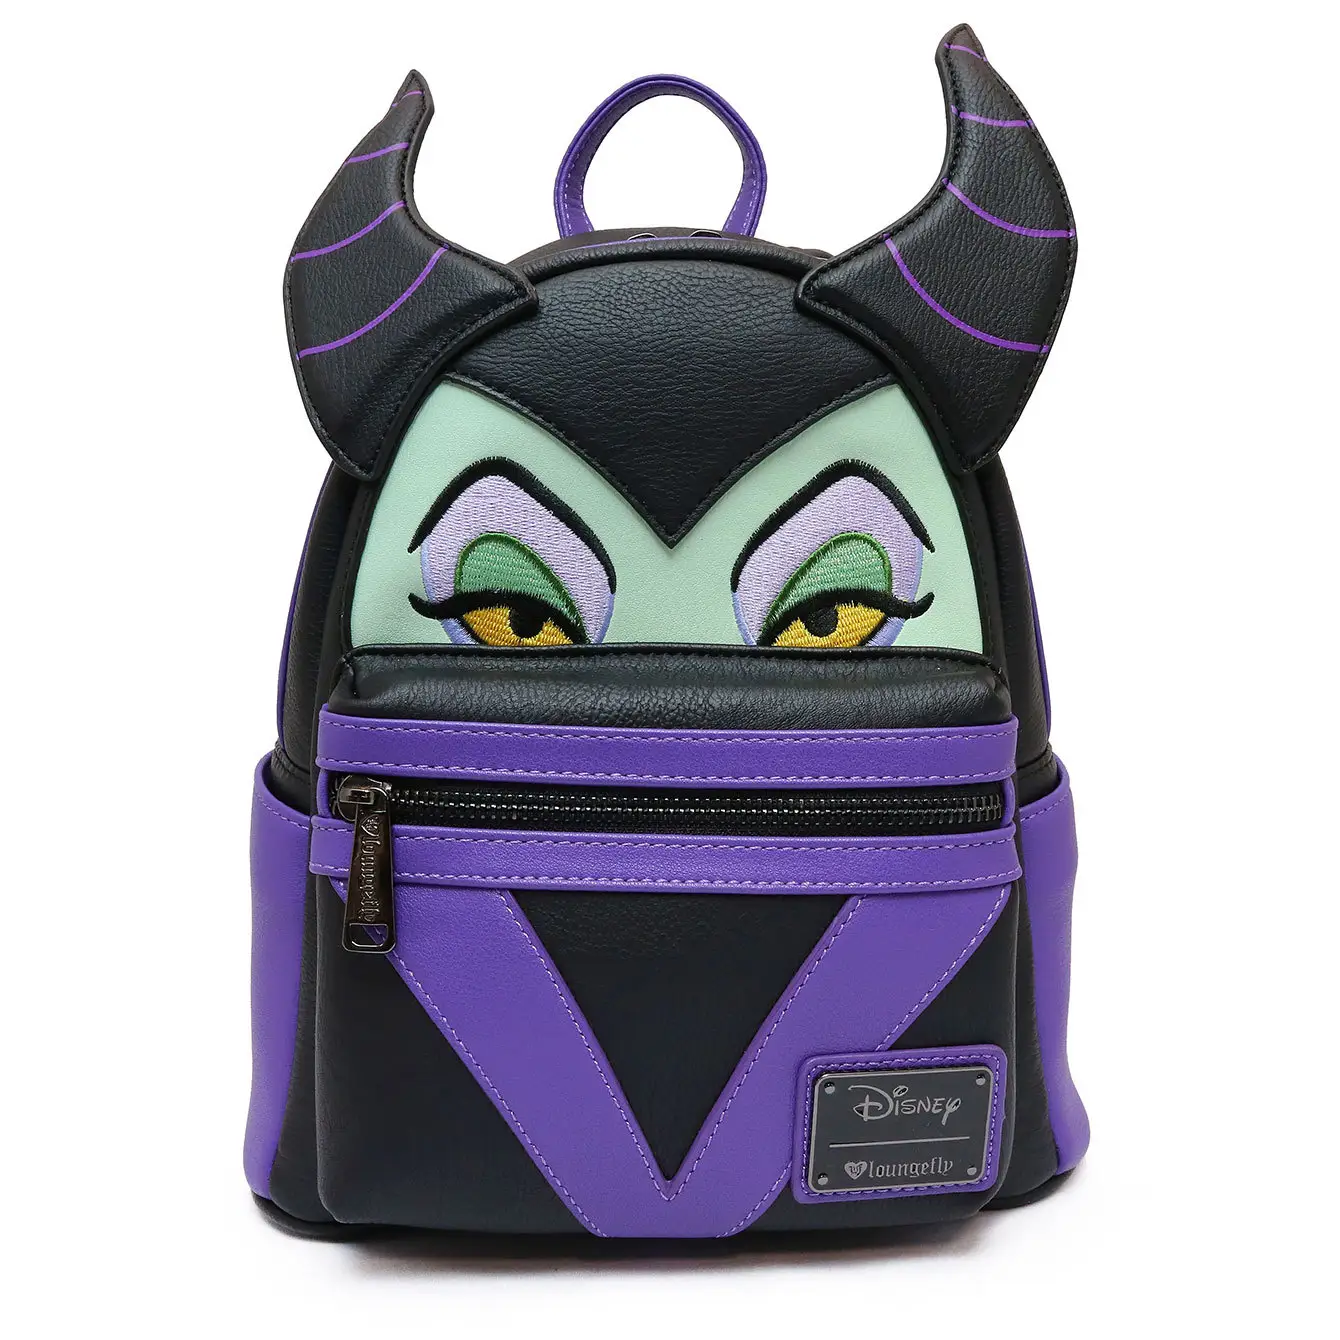 Disney Loungefly Schoolbag Maleficent Backpack for Men and Women Casual School Bag